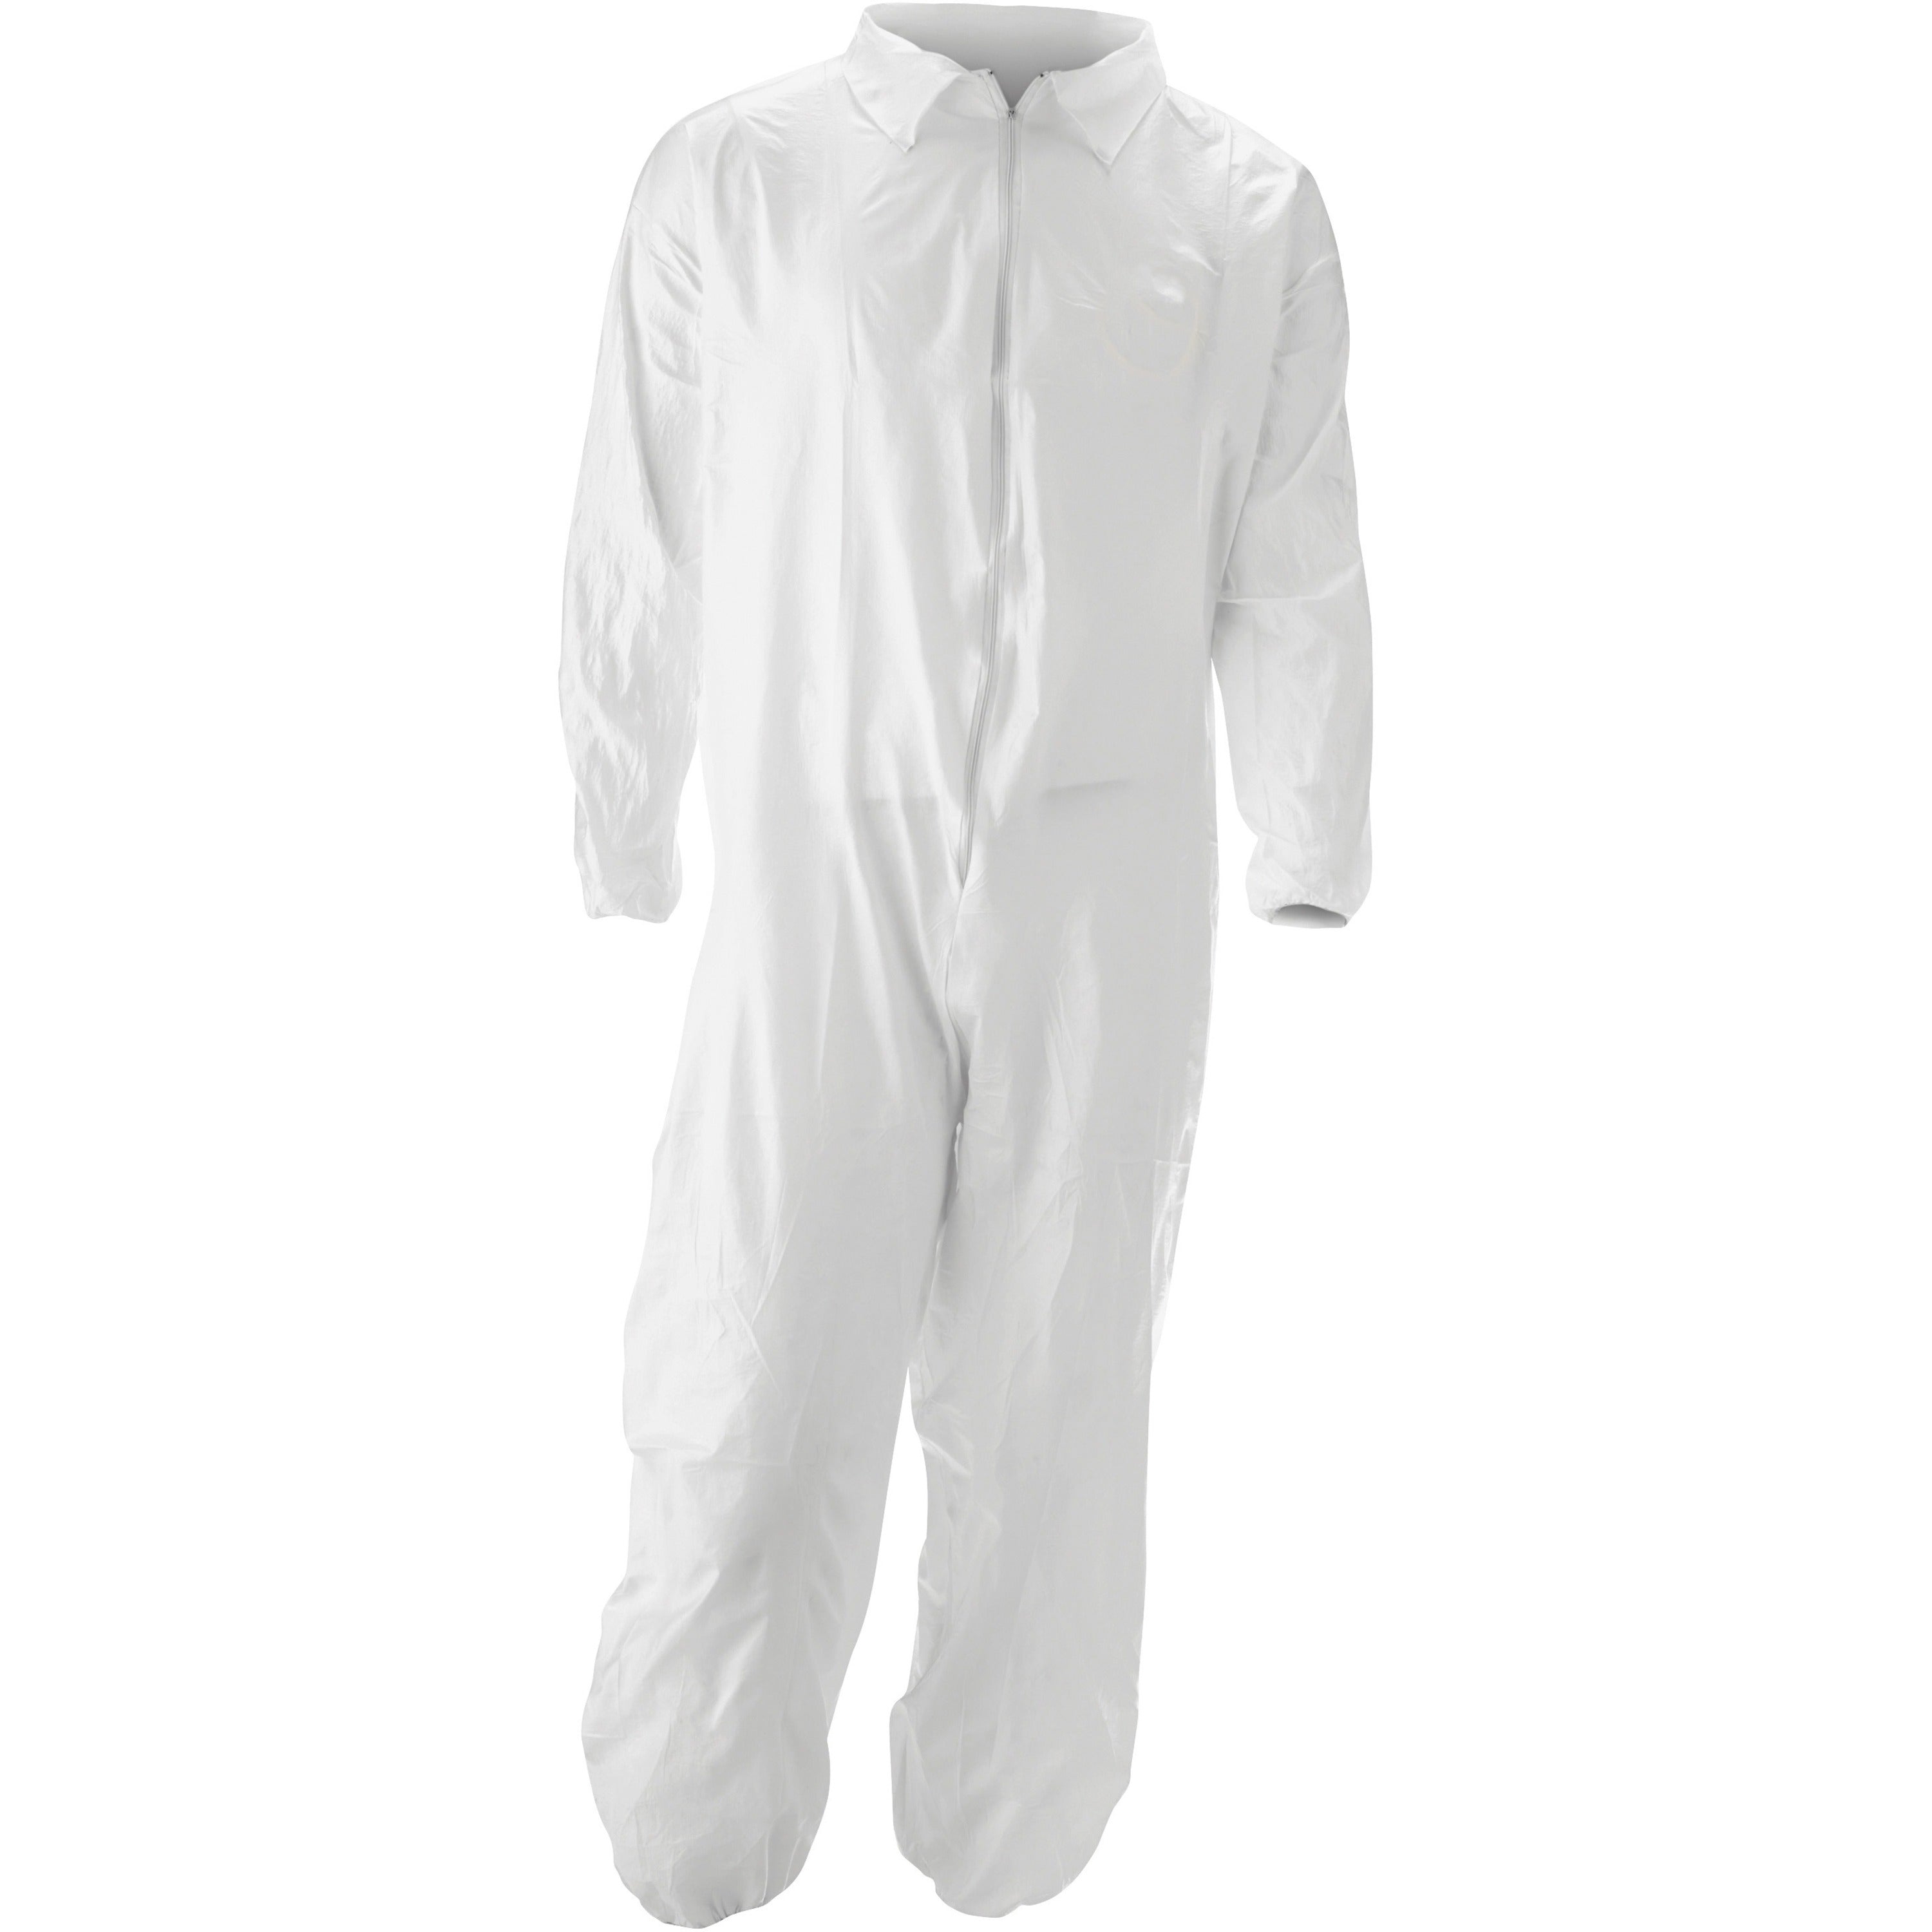 malt-promax-coverall-recommended-for-chemical-painting-food-processing-pesticide-spraying-asbestos-abatement-medium-size-zipper-closure-polyolefin-white-25-carton_impm1017m - 1